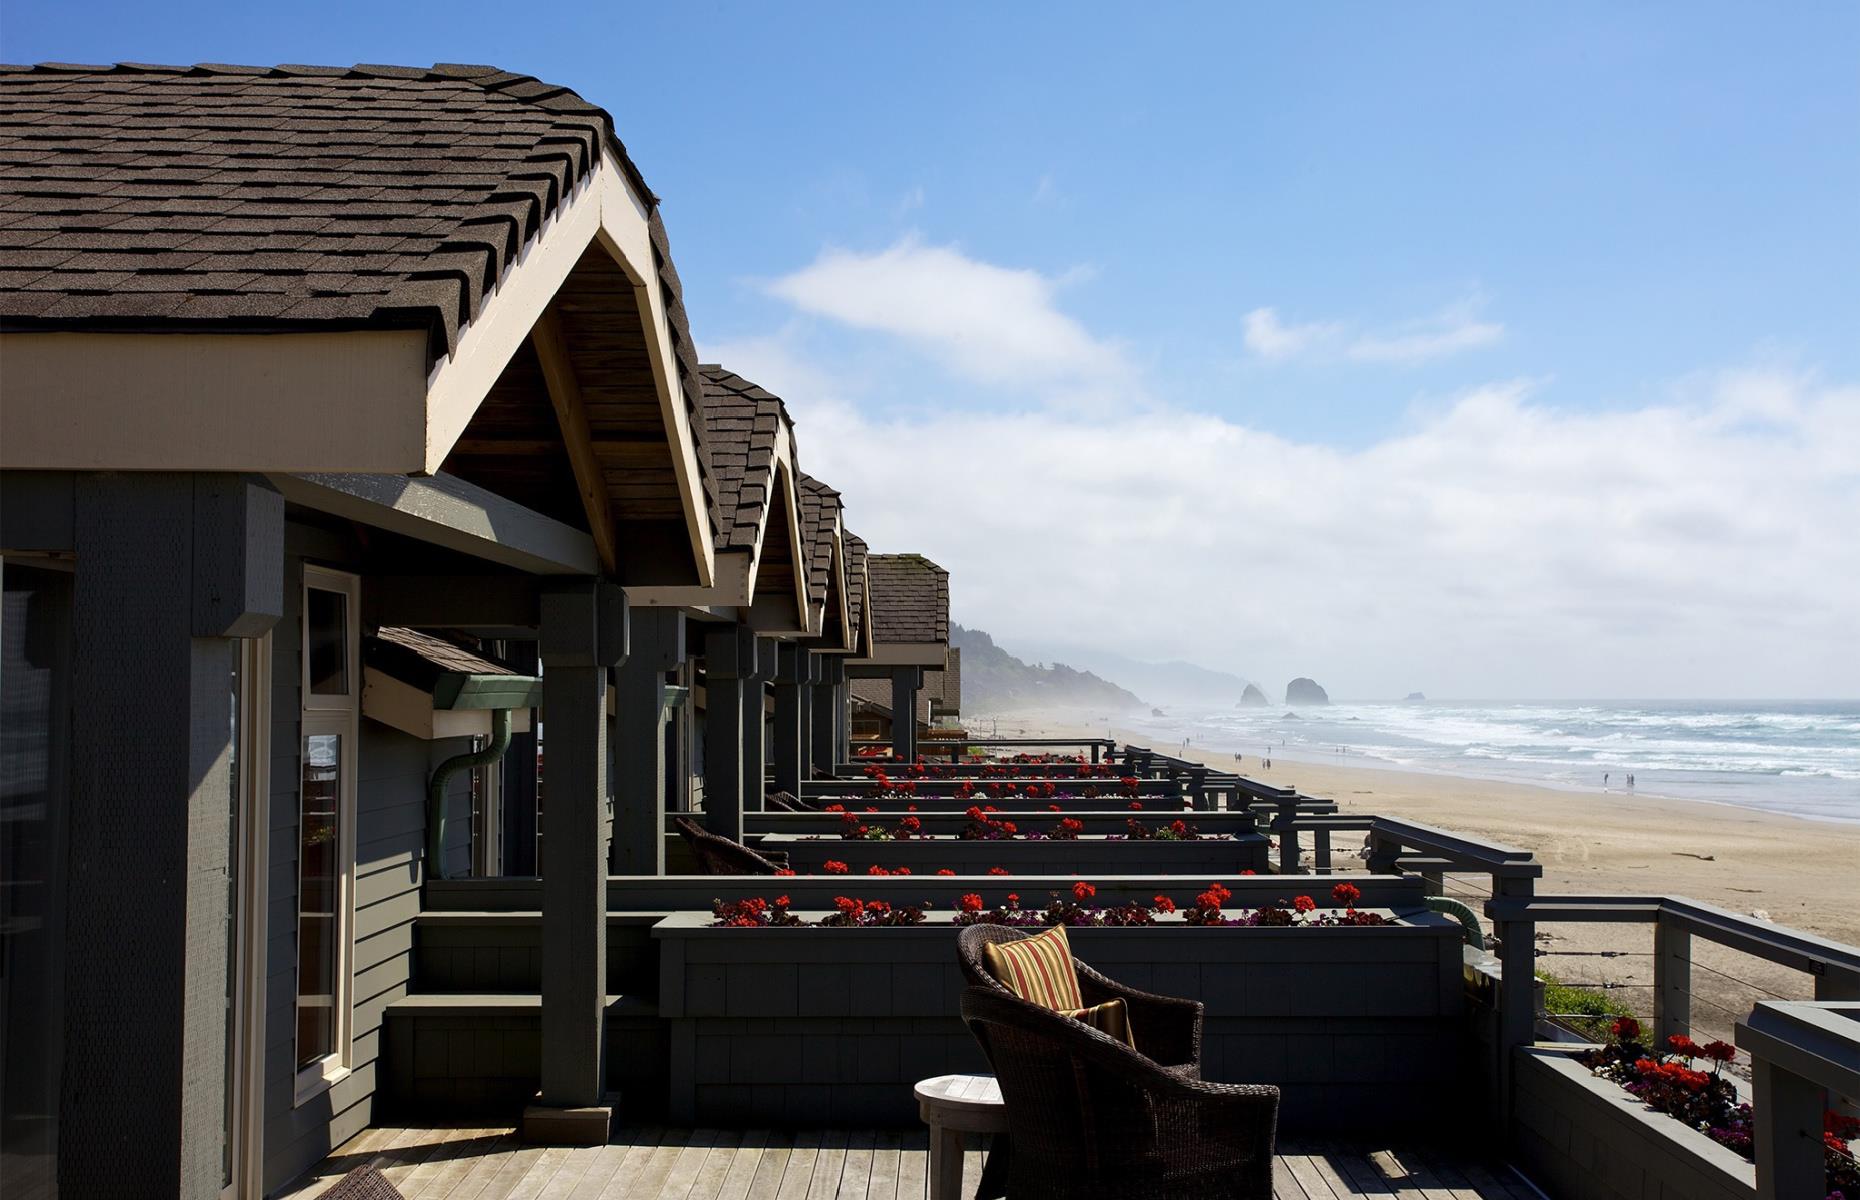 <p>Cannon Beach is one of the most popular destinations on Oregon’s Pacific coast and the town is home to a wide range of seaside accommodations. <a href="https://www.stephanieinn.com">Stephanie Inn</a> is an elegant boutique hotel that offers beach access and much-coveted views of Haystack Rock. While on site, guests can also enjoy fine dining, a spa, bonfires on the beach and other curated Pacific Northwest experiences.</p>